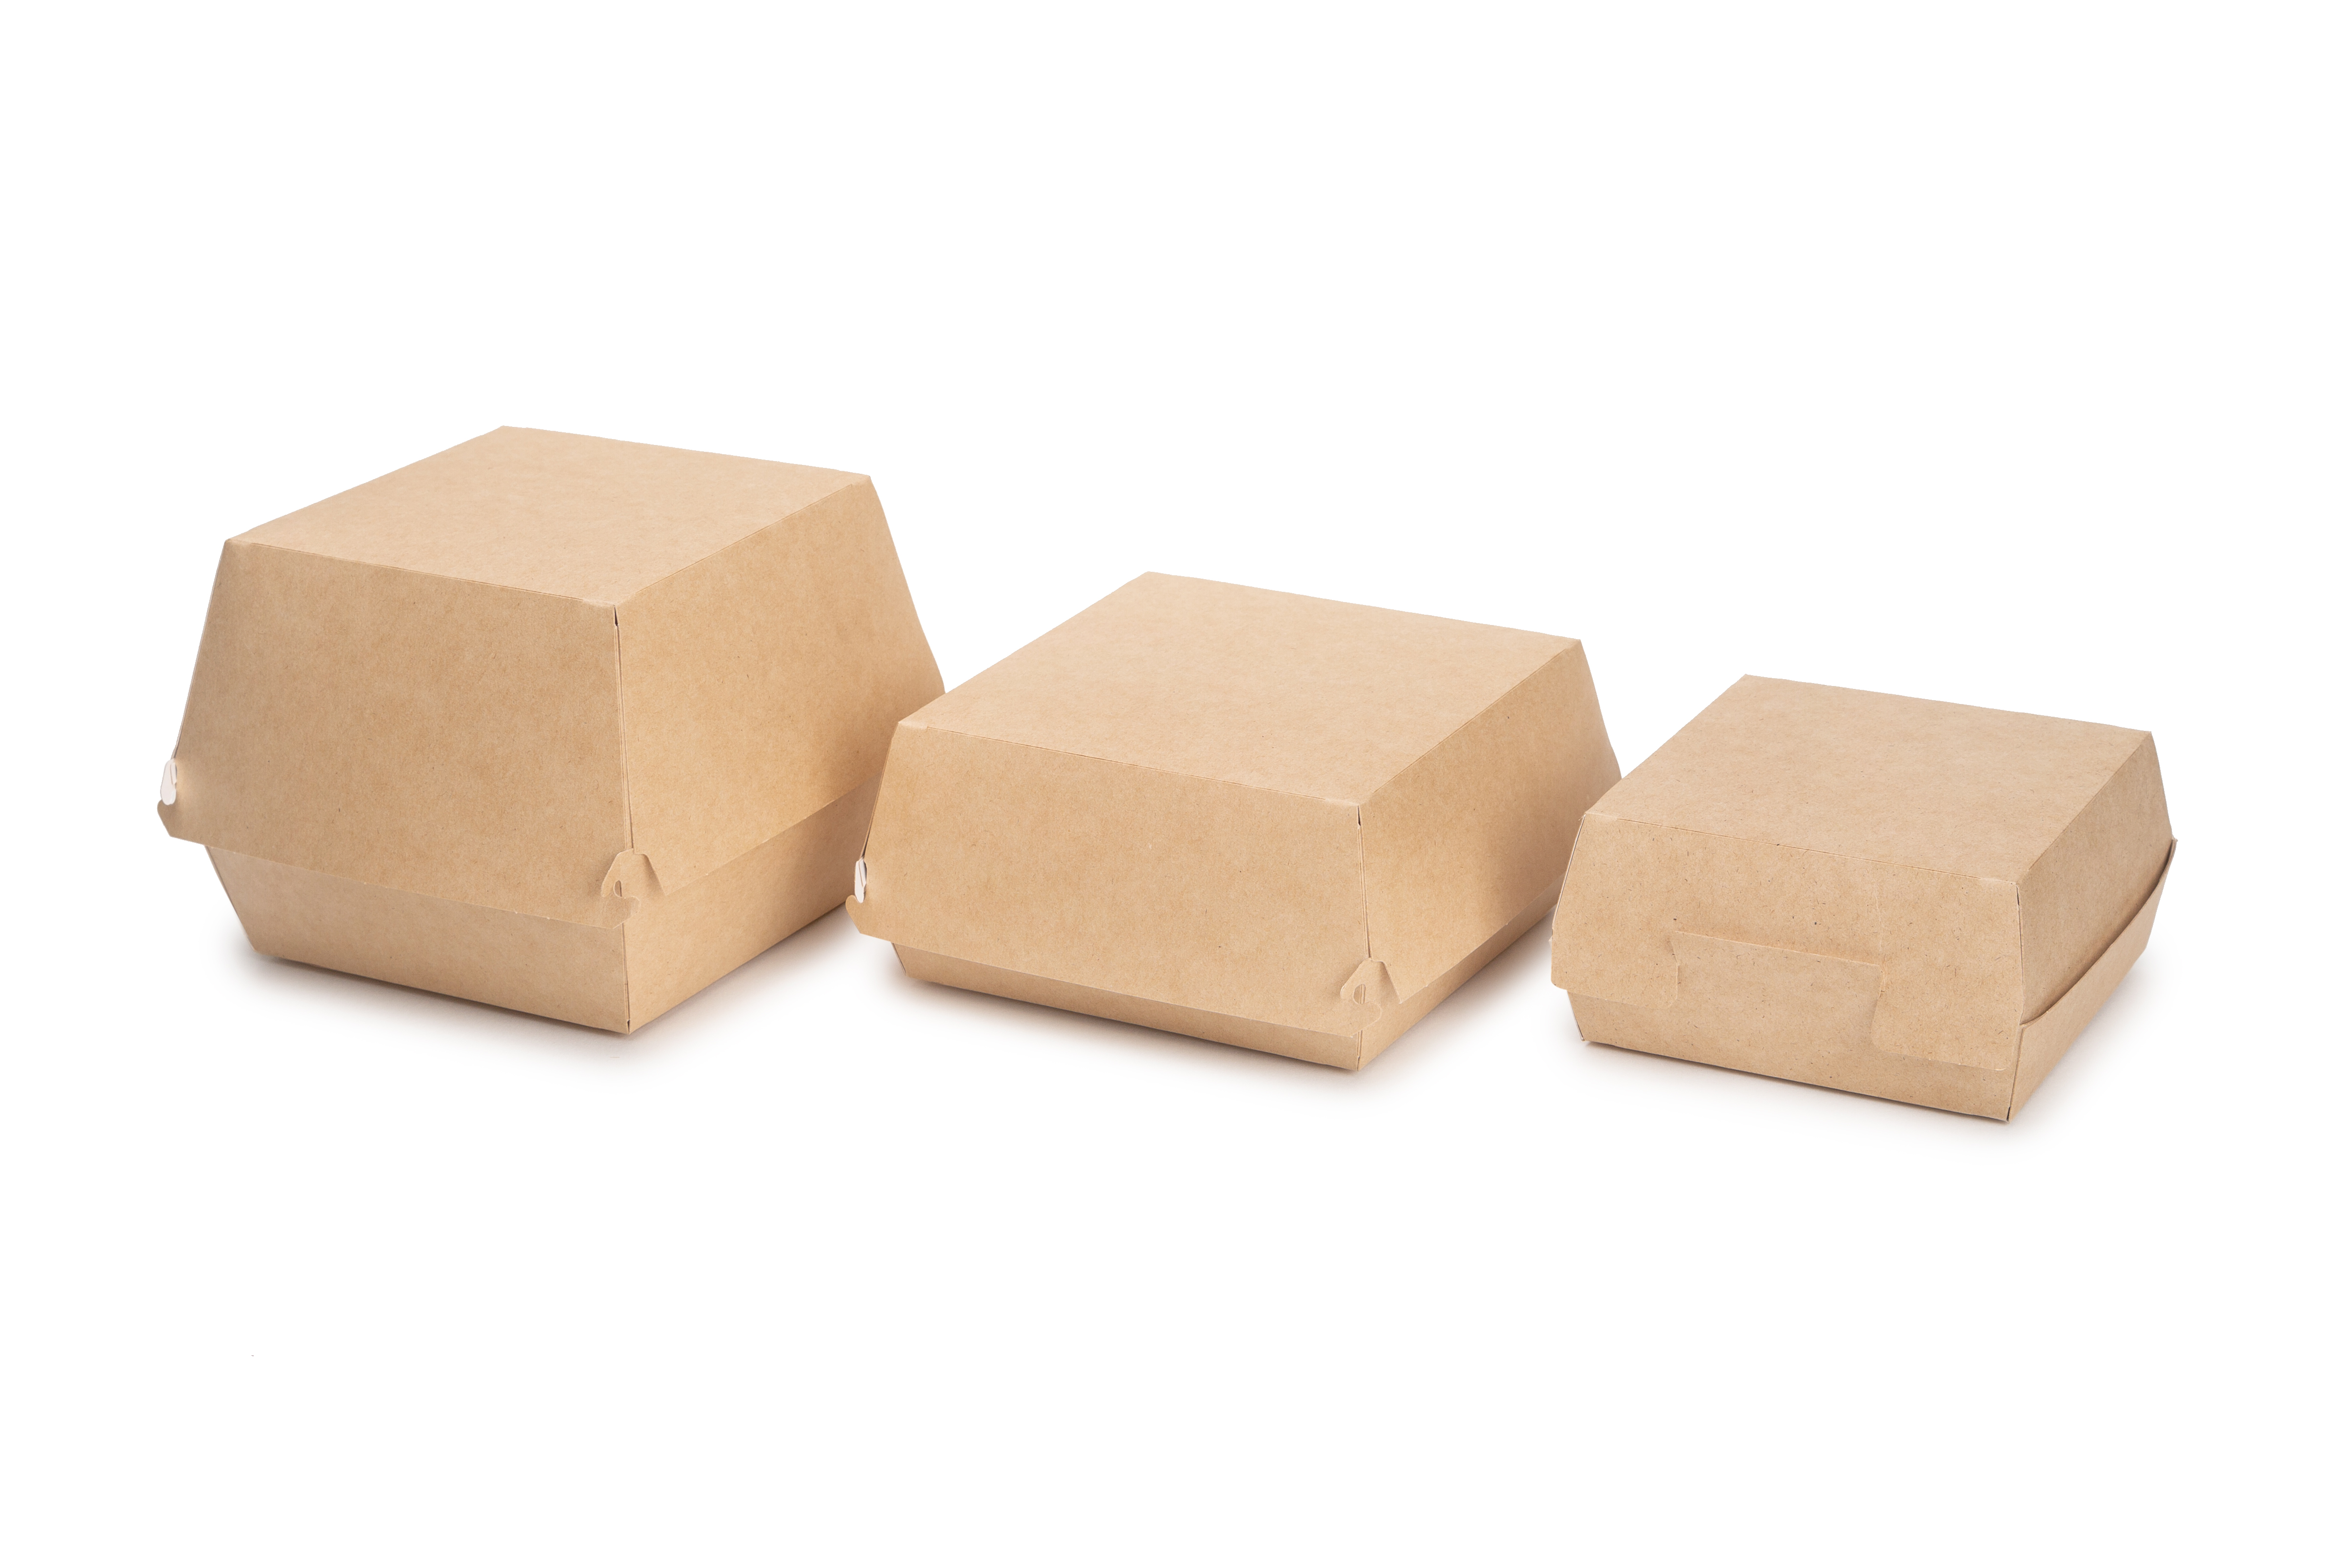 OSQ Burger L Pure Kraft packaging for burgers